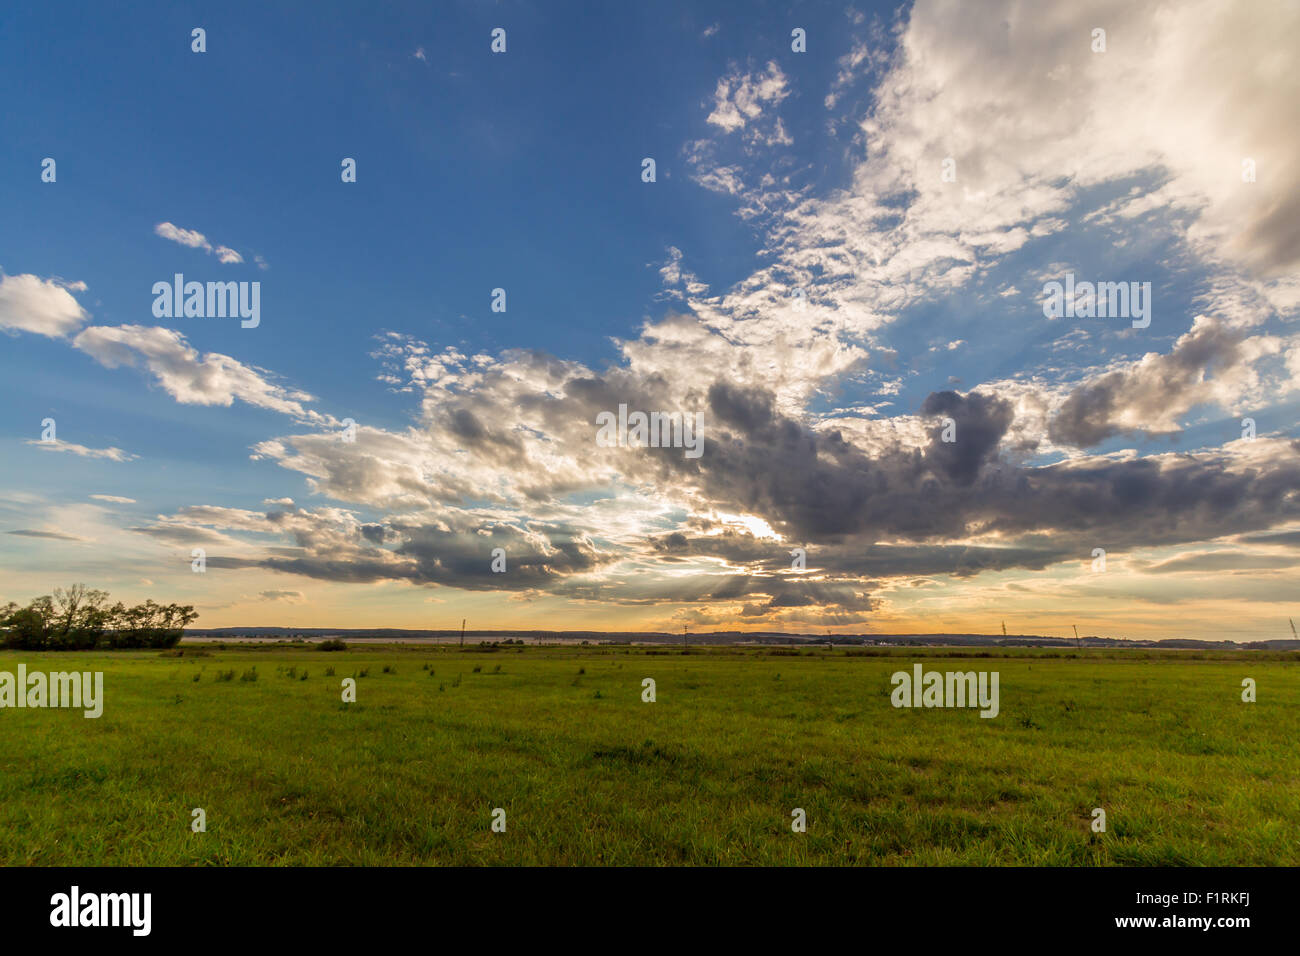 Dramatic sunset over green field Stock Photo